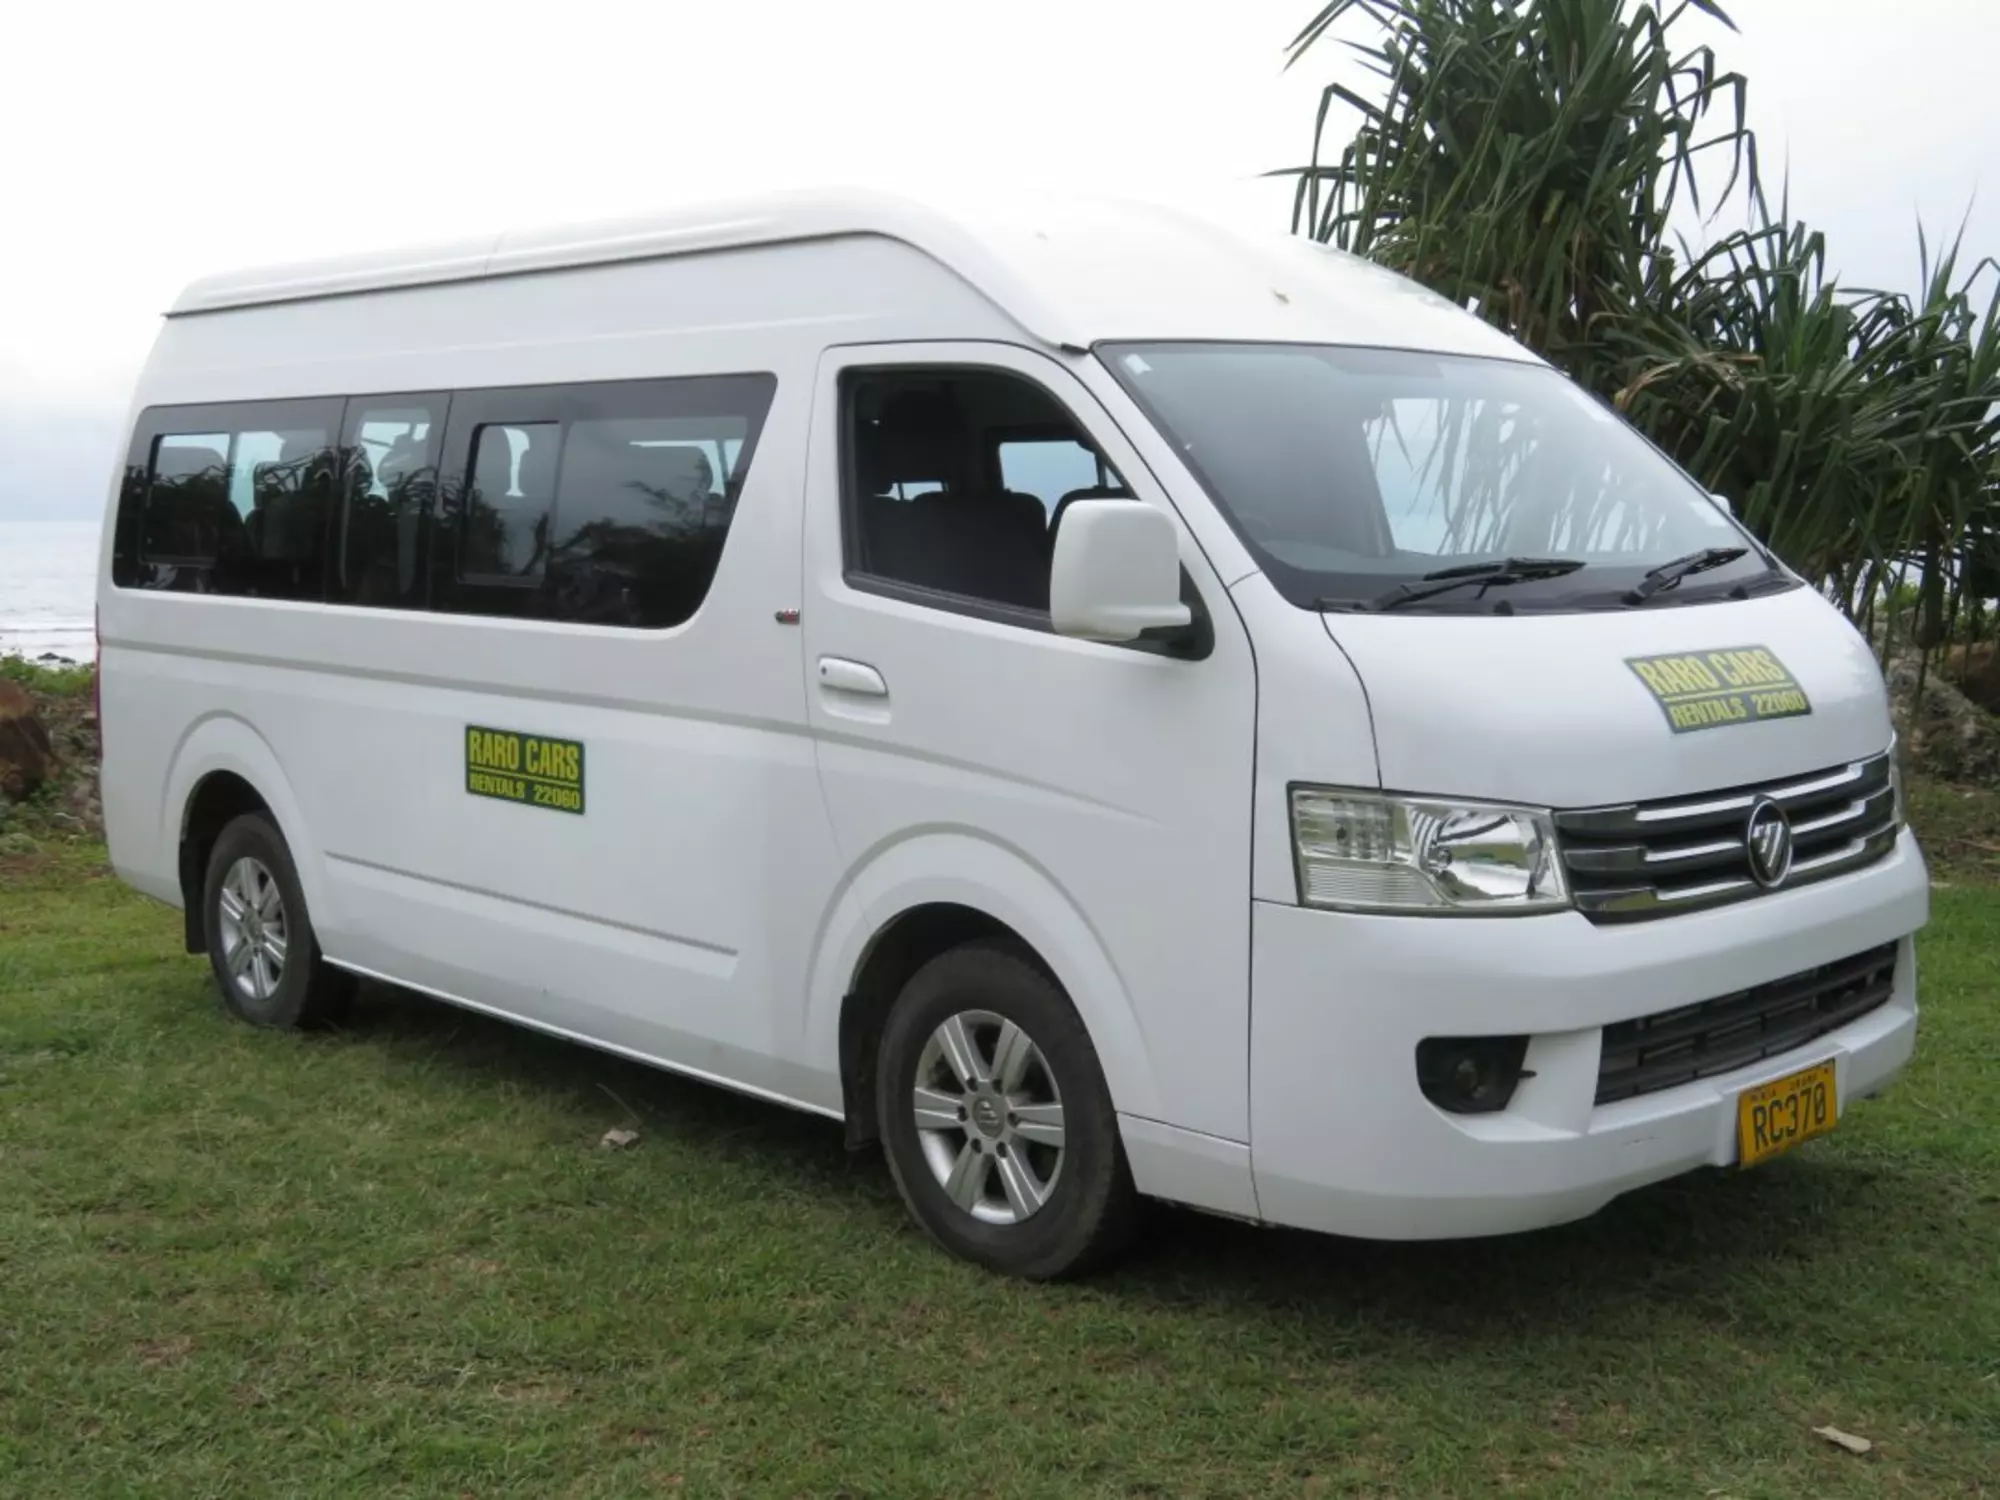 Raro Cars People-Mover-16-seater-scaled 